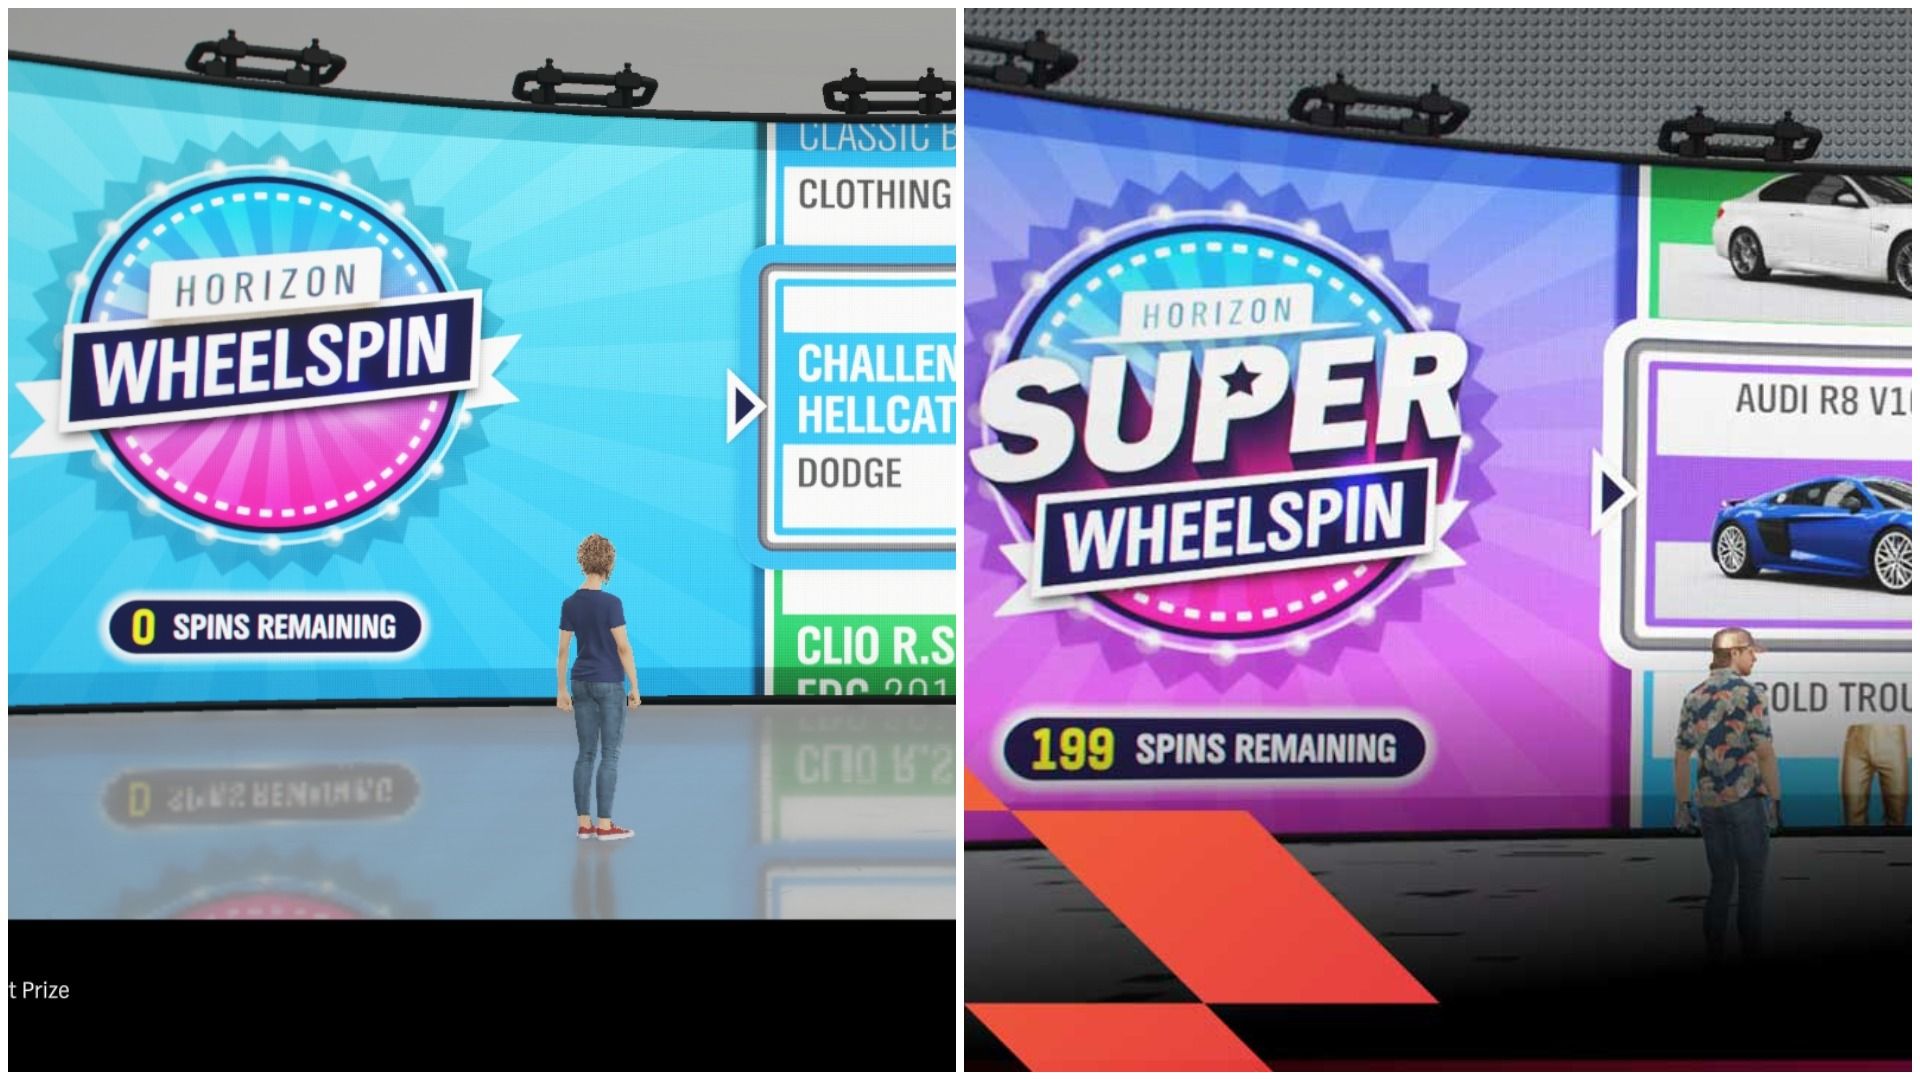 forza horizon 5 Wheelspins And Super Wheelspins earn credits 